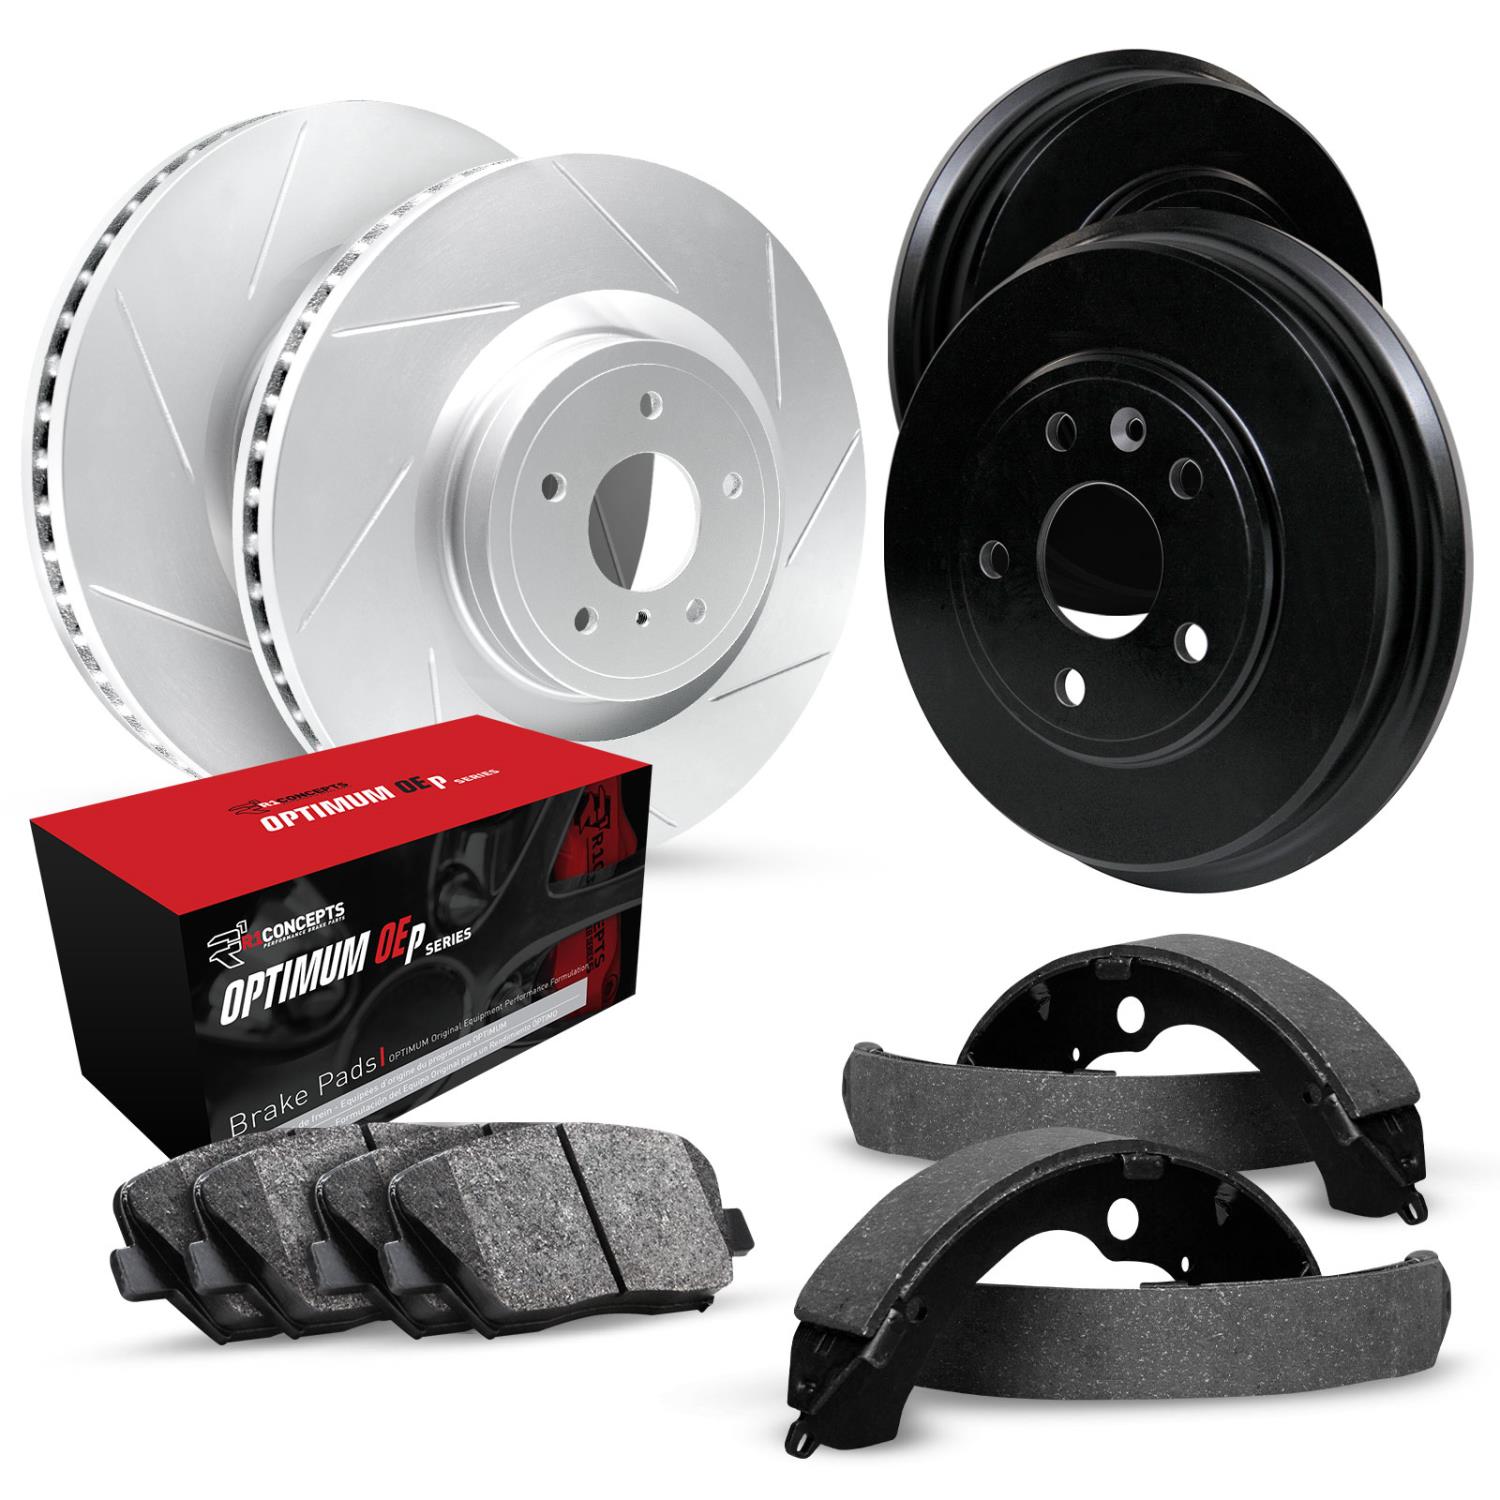 GEO-Carbon Slotted Brake Rotor & Drum Set w/Optimum OE Pads & Shoes, 1986-1986 Lexus/Toyota/Scion, Position: Front & Rear